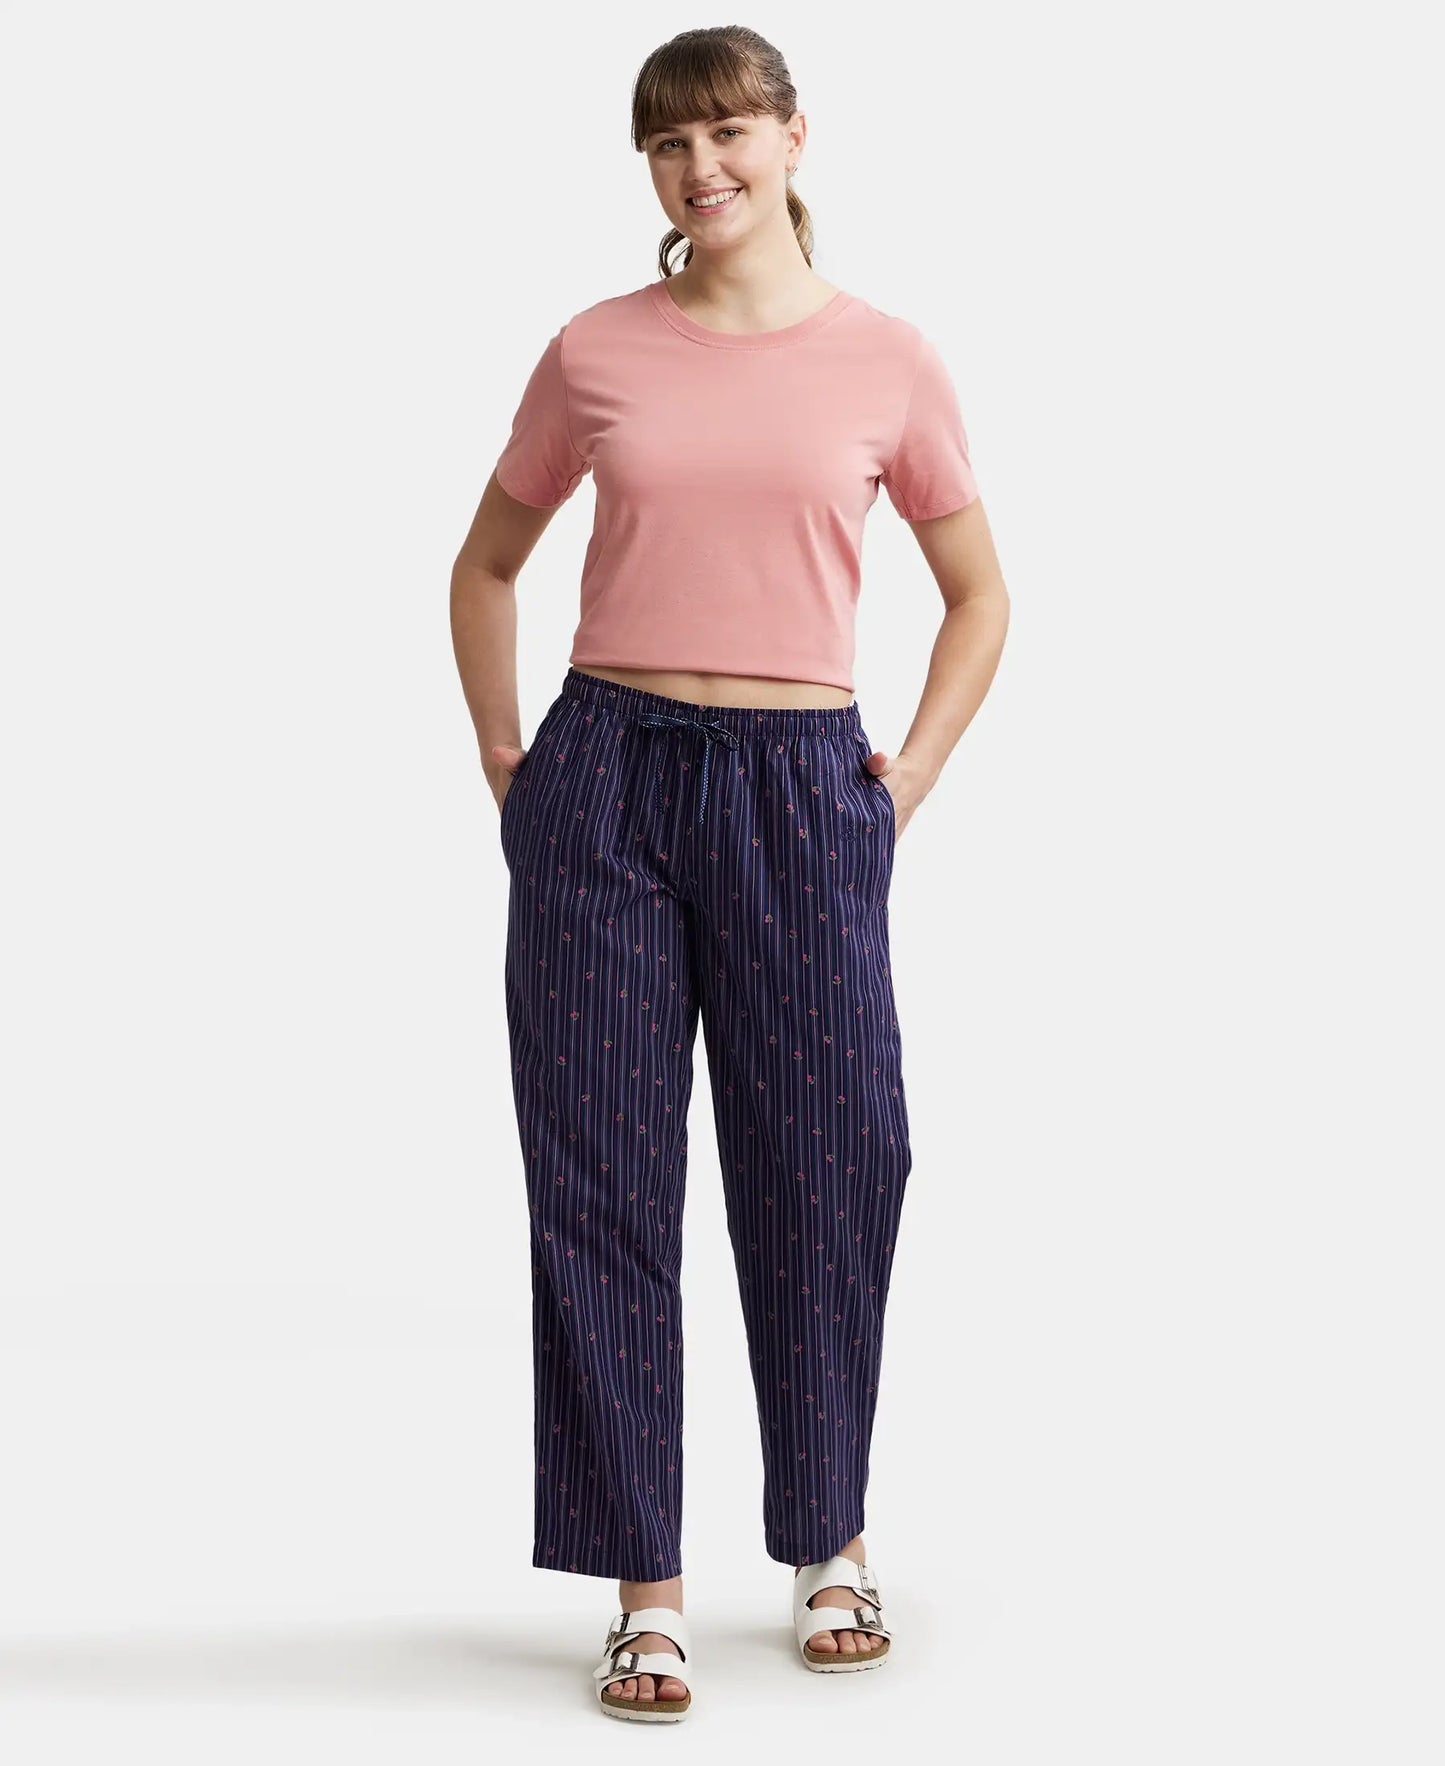 Super Combed Cotton Woven Fabric Relaxed Fit Striped Pyjama with Side Pockets - Classic Navy Assorted Checks-4